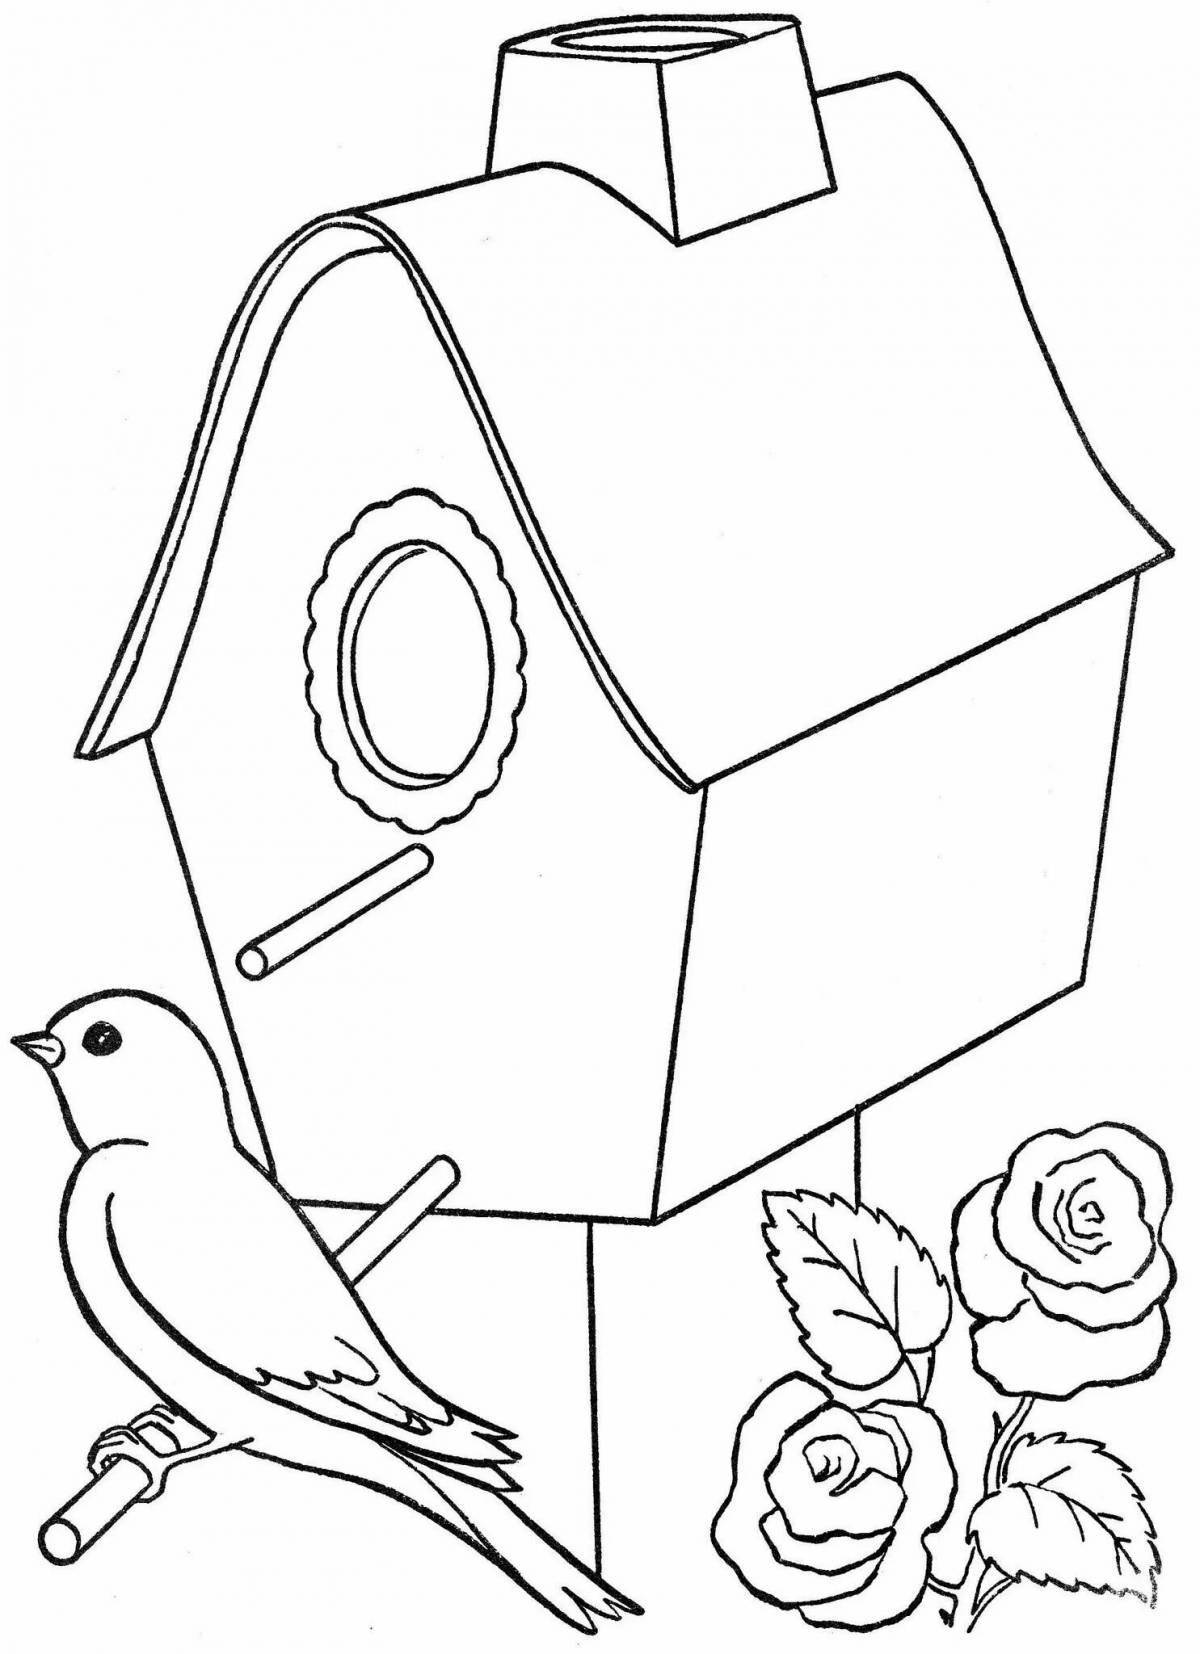 Coloring page of feeders for children